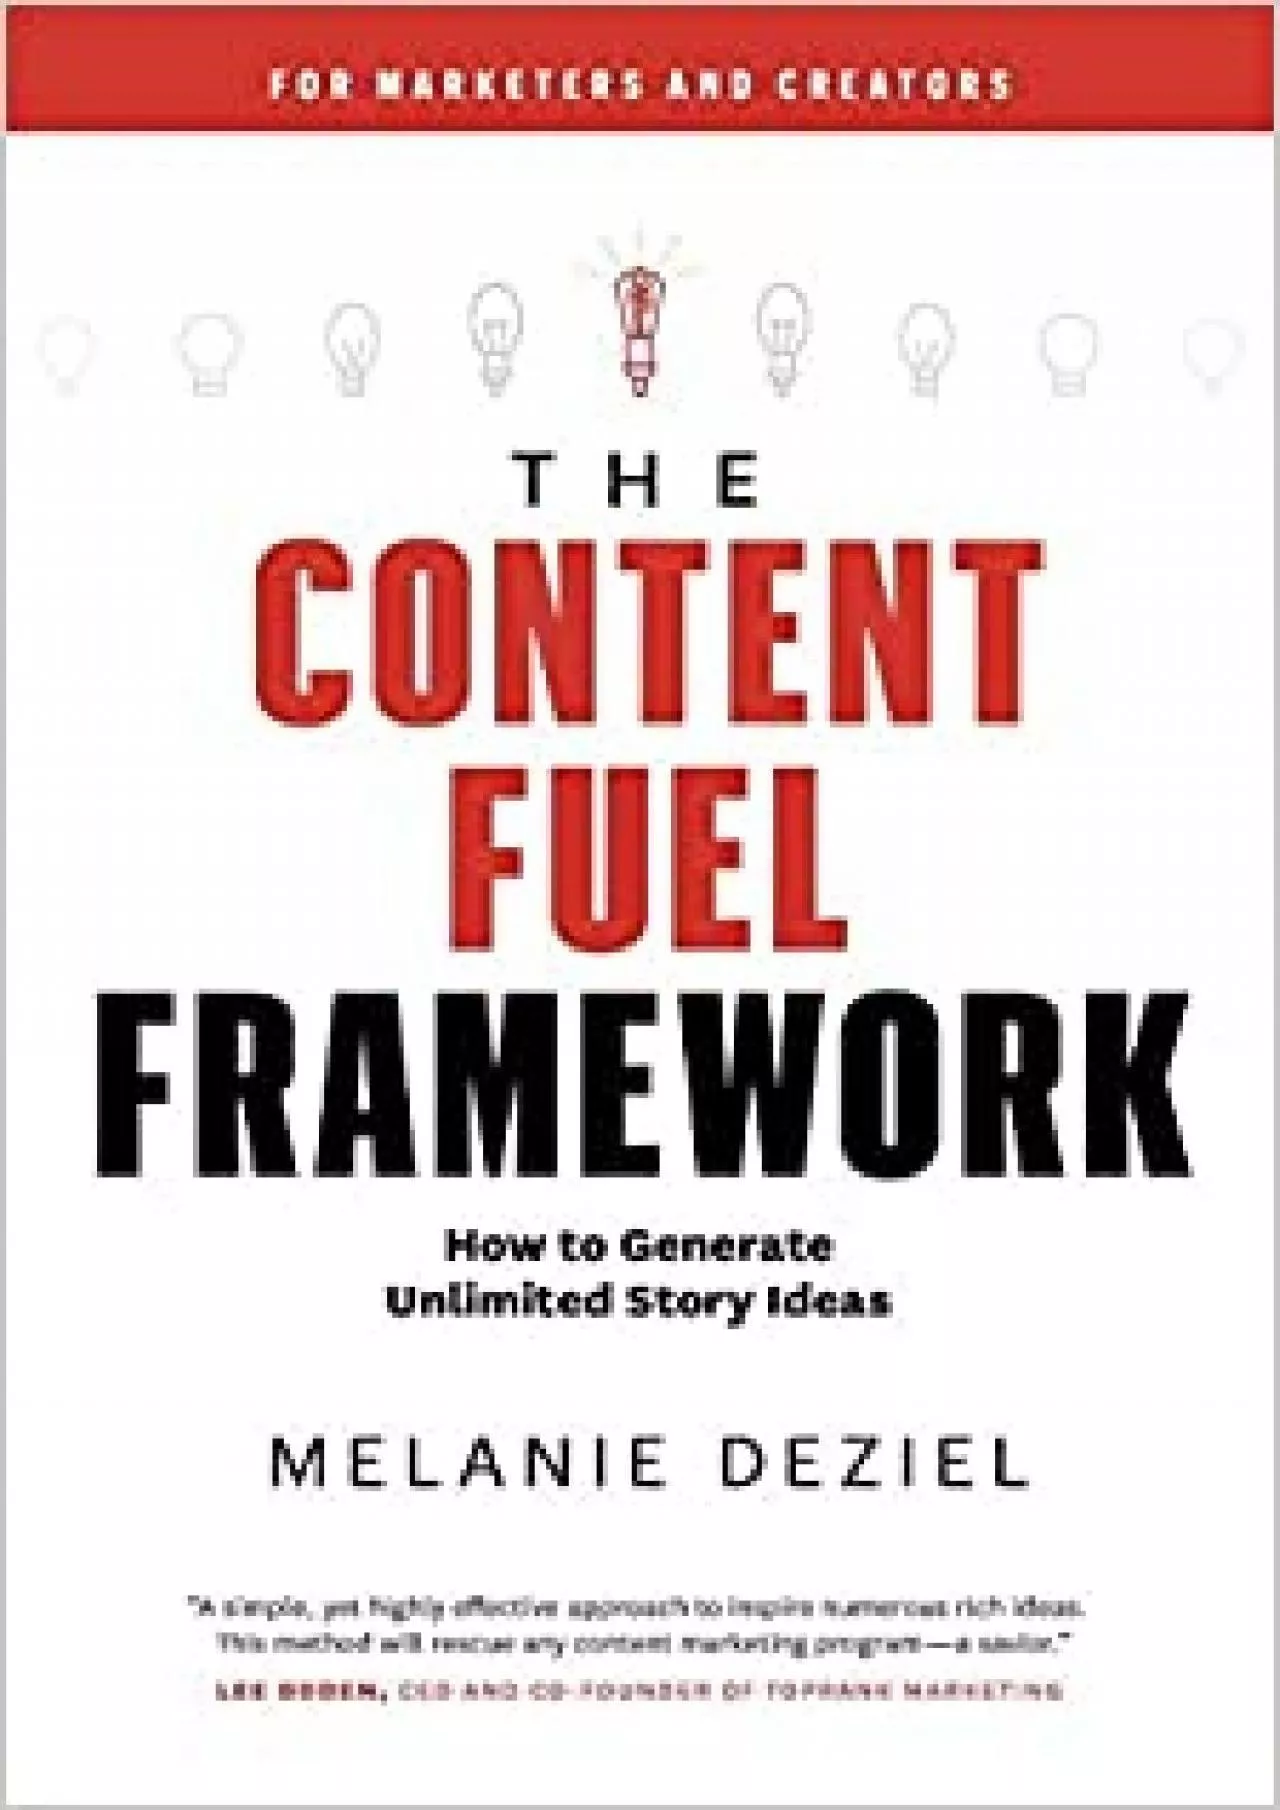 The Content Fuel Framework How to Generate Unlimited Story Ideas For Marketers and Creators